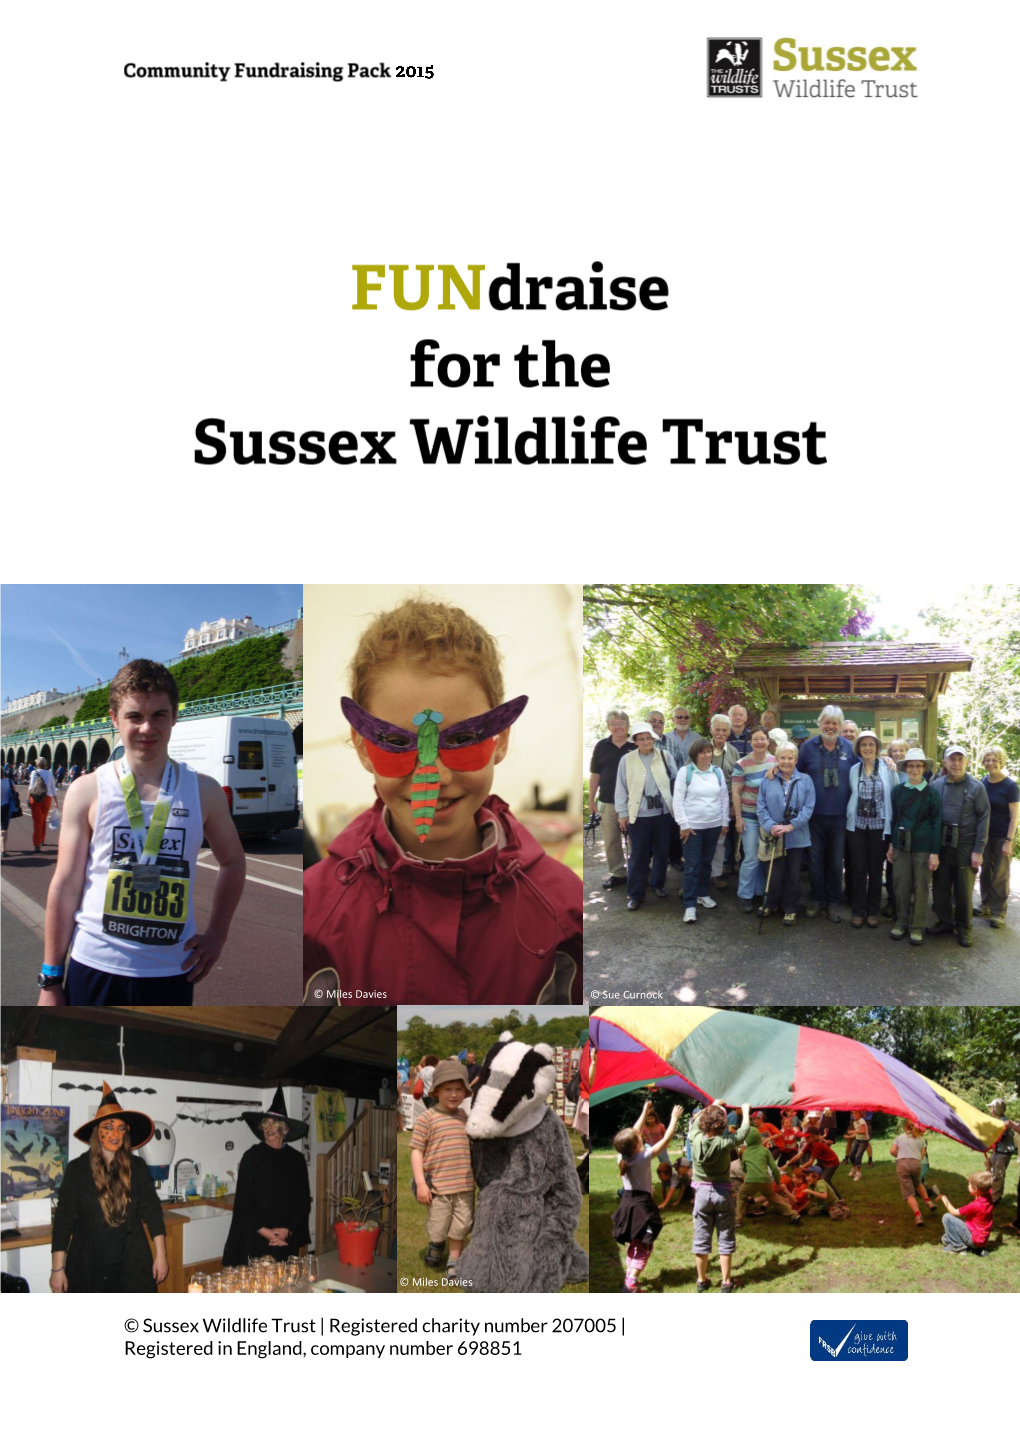 © Sussex Wildlife Trust | Registered Charity Number 207005 | Registered in England, Company Number 698851